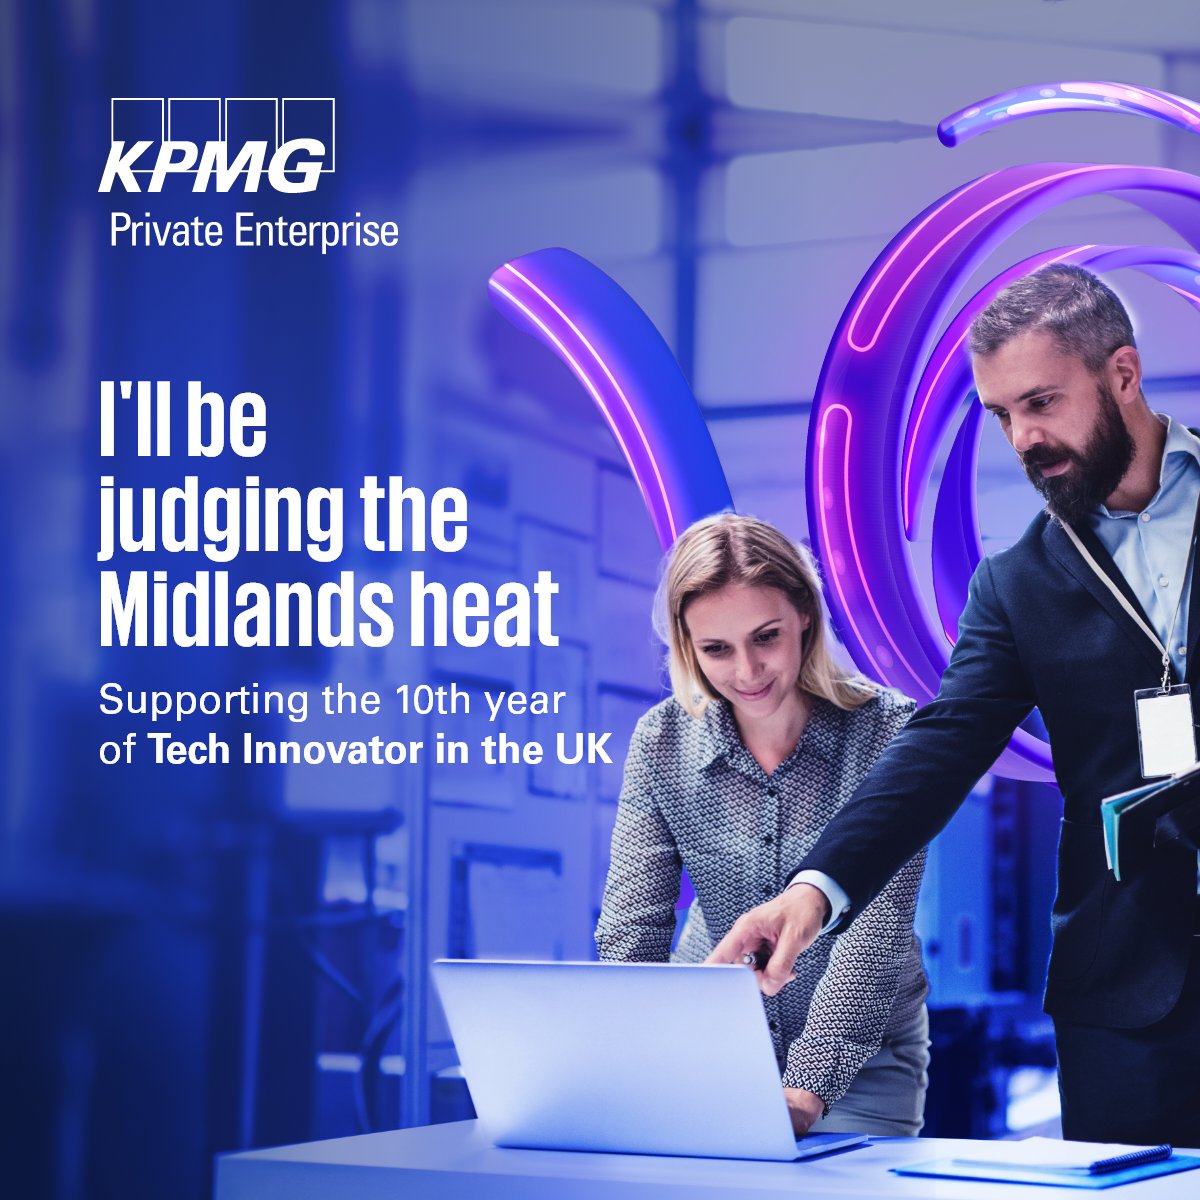 Calling all entrepreneurs, dreamers and difference makers! This is a competition you don't want to miss... Find out more about @kpmguk Tech Innovator in the UK 2023 look here 👉m.marketing.kpmg.uk/webApp/kpmg-pr… Applications close this Friday ⏳ #techinnovatoruk